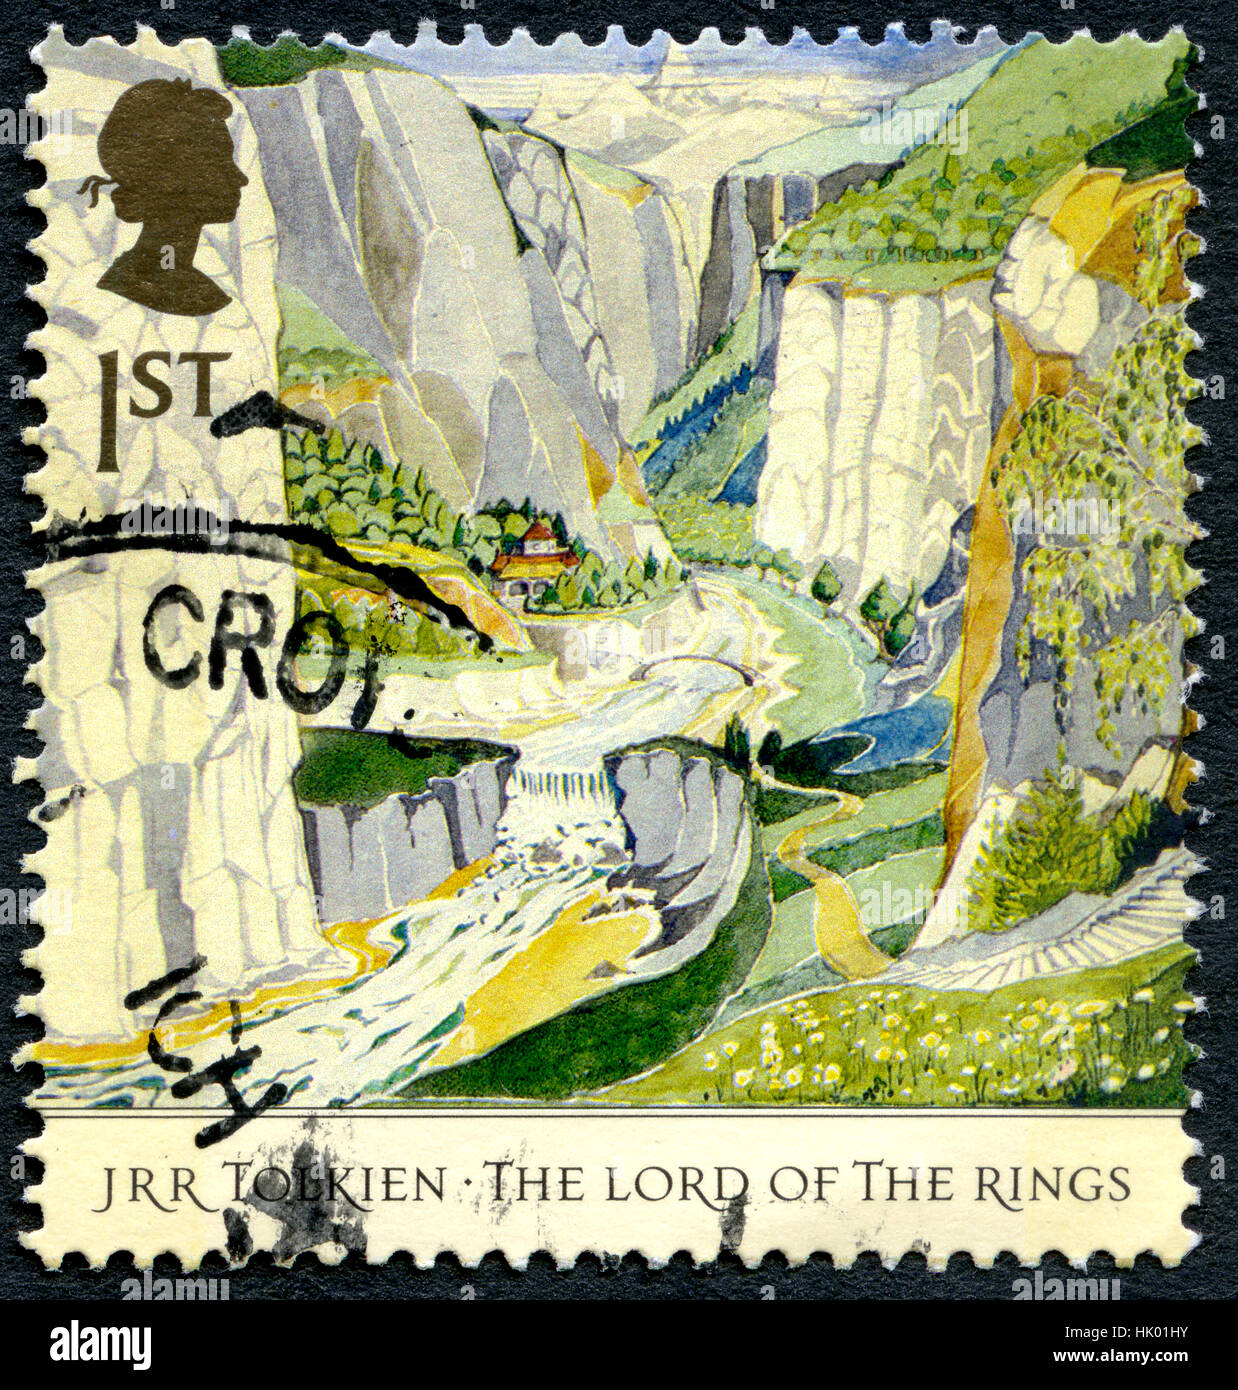 GREAT BRITAIN - CIRCA 2004: A used postage stamp from the UK, celebrating the epic fantasy The Lord of the Rings novels by J R R Tolkien, circa 2004. Stock Photo